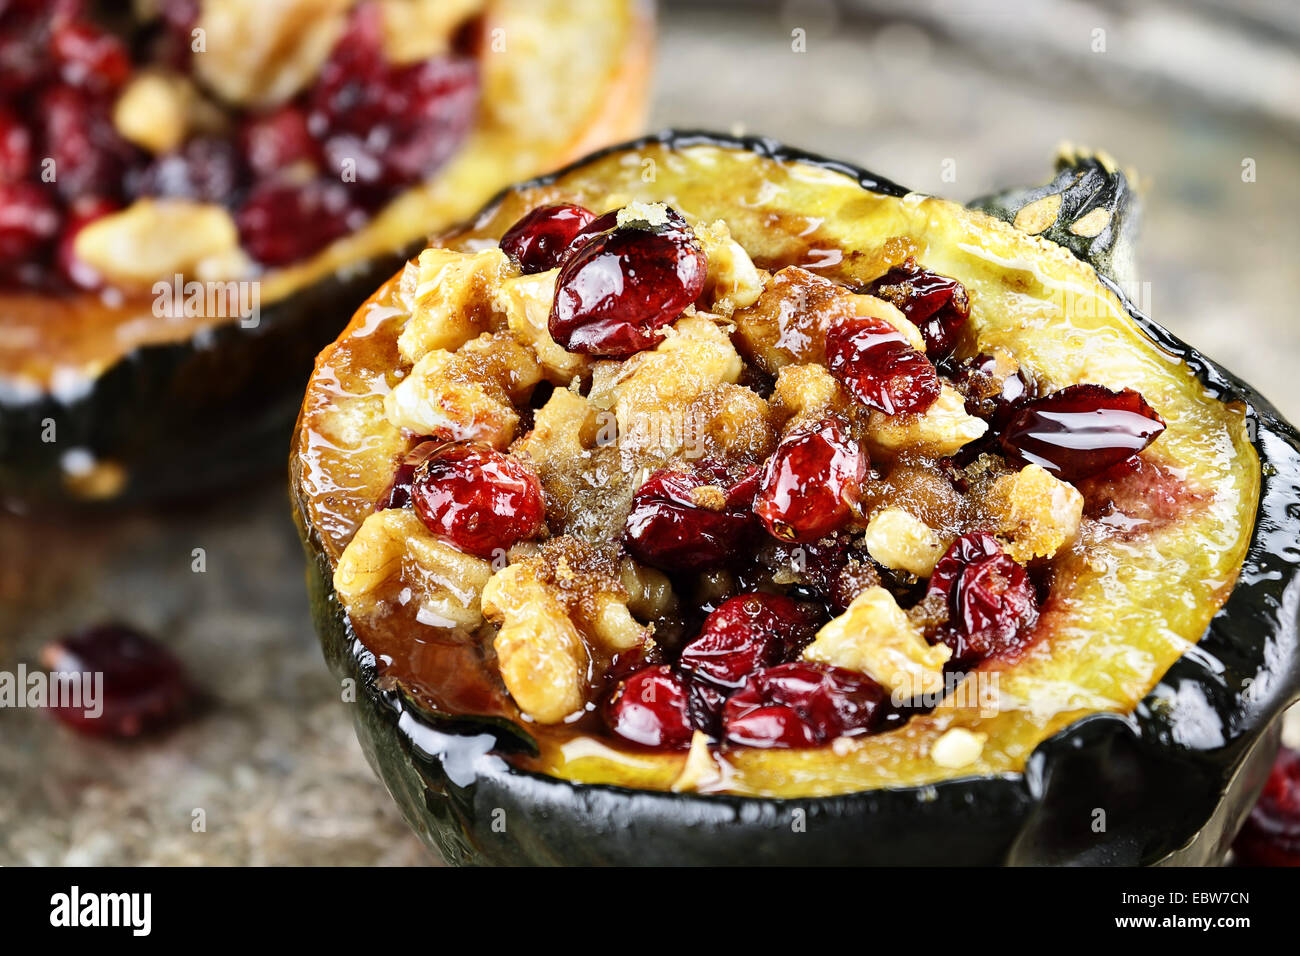 Acorn squash stuffed and baked with brown sugar, walnuts and cranberries, ready for holiday dinners. Stock Photo